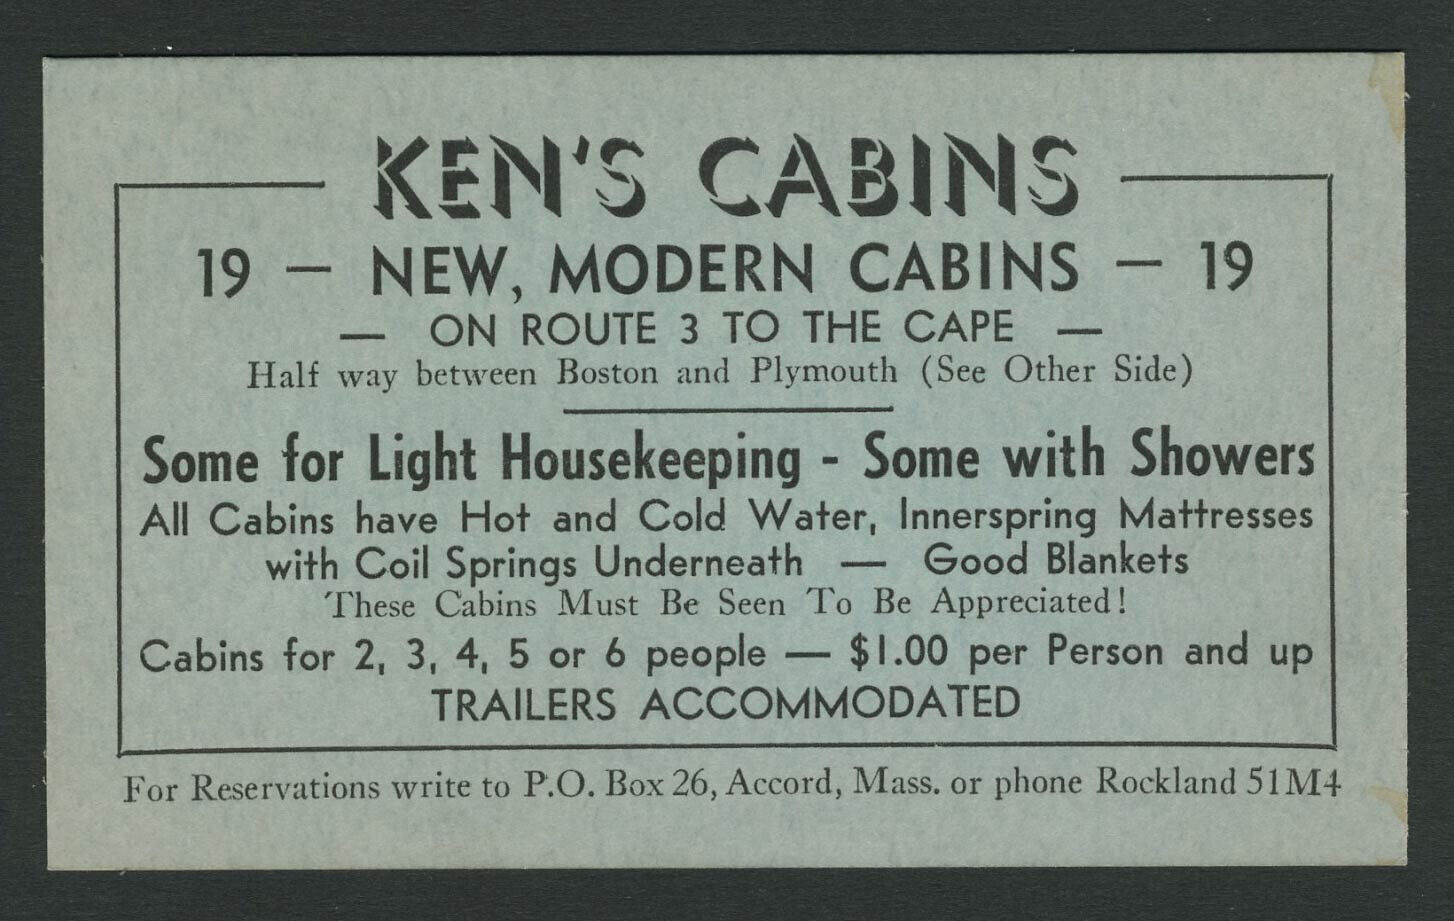 Norwell N Scituate MA: c.1940s Business Card KEN\'S MODERN CABINS Route 3 to Cape